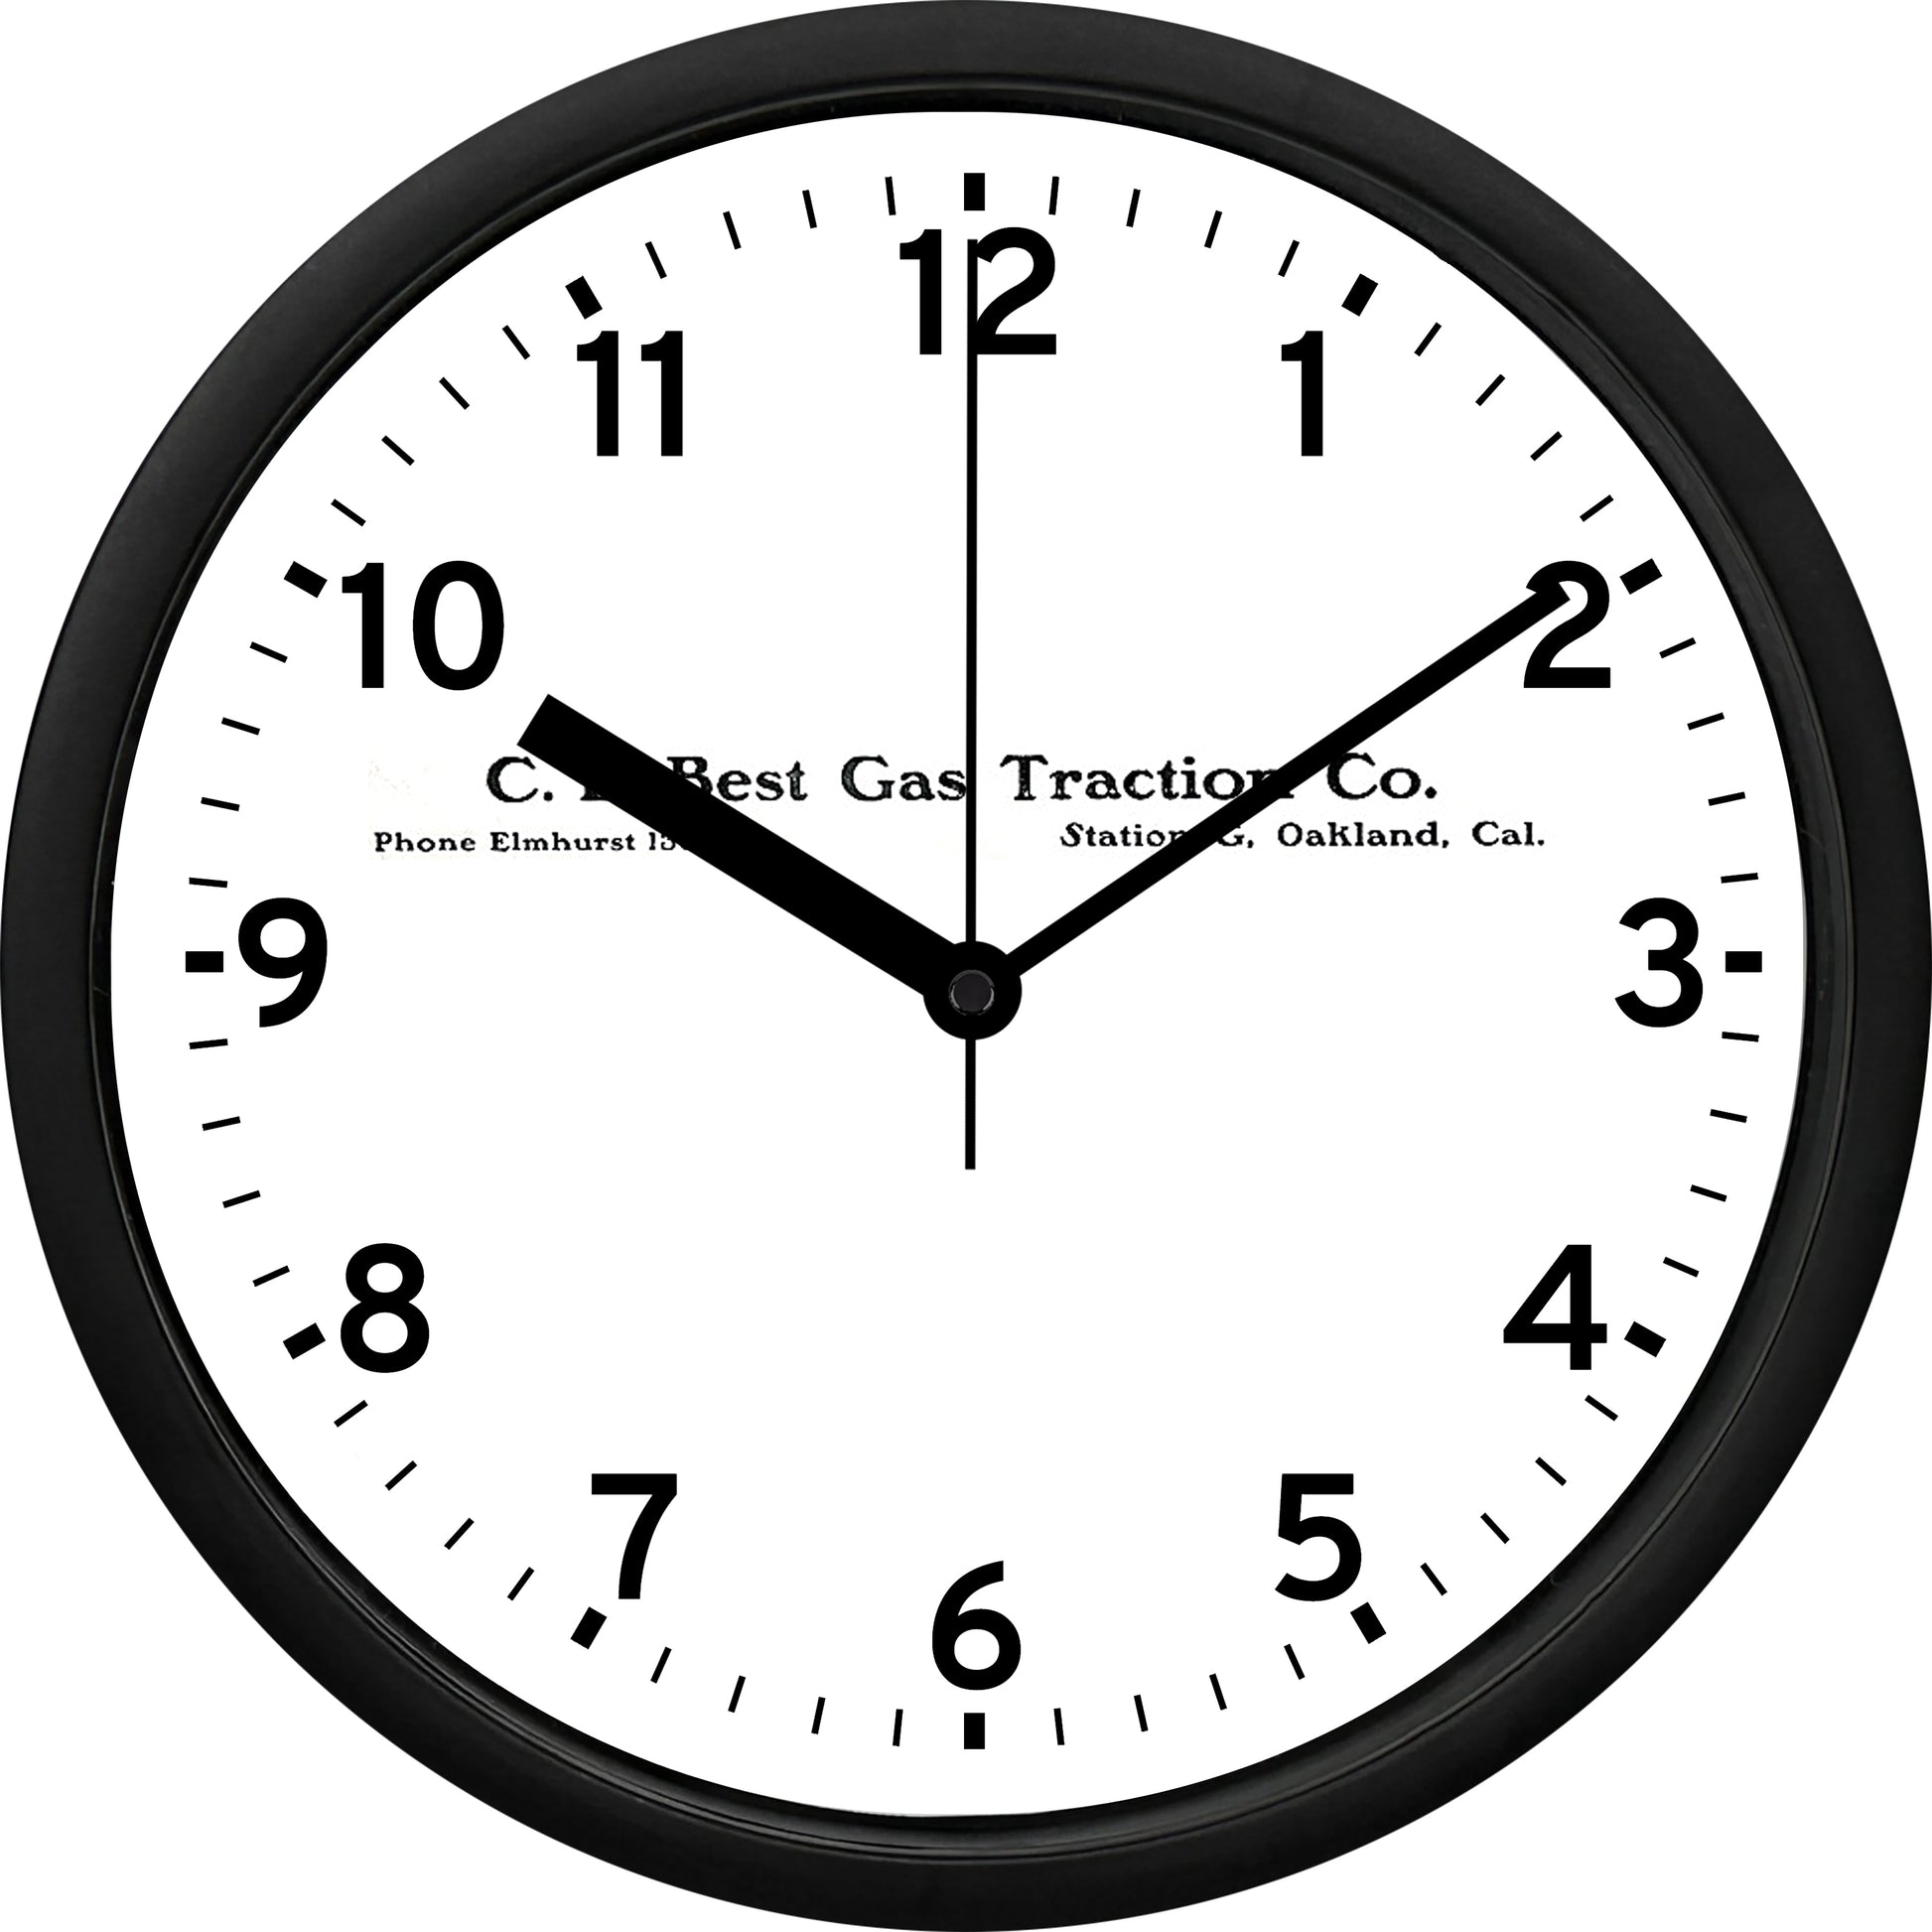 C.L. Best Gas Traction Co. Wall Clock